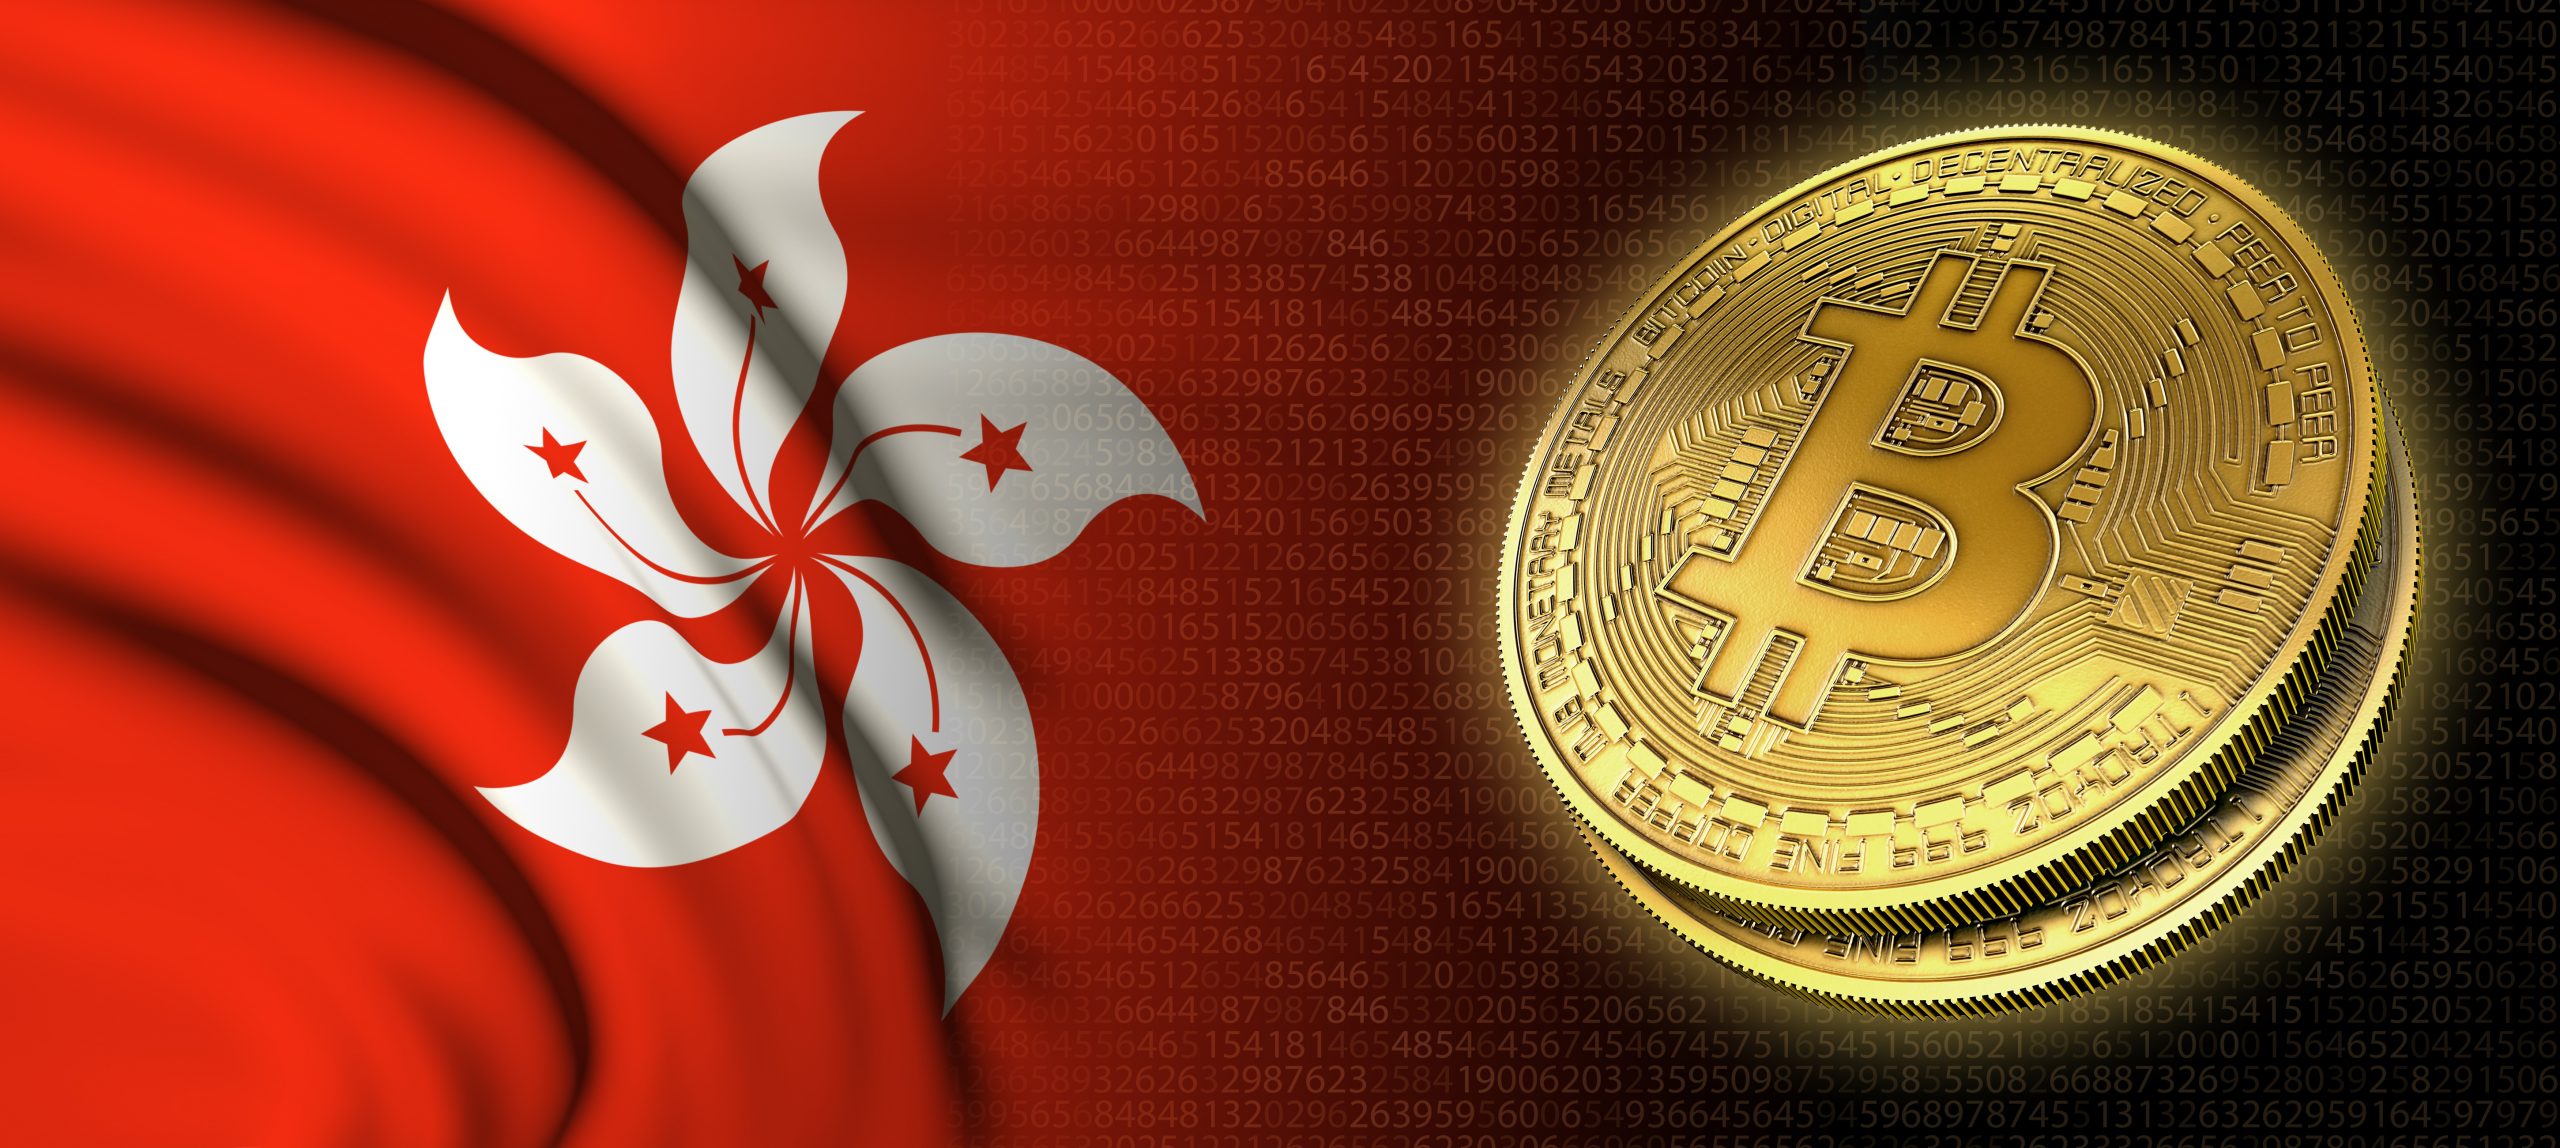 Is bitcoin illegal in Hong Kong?